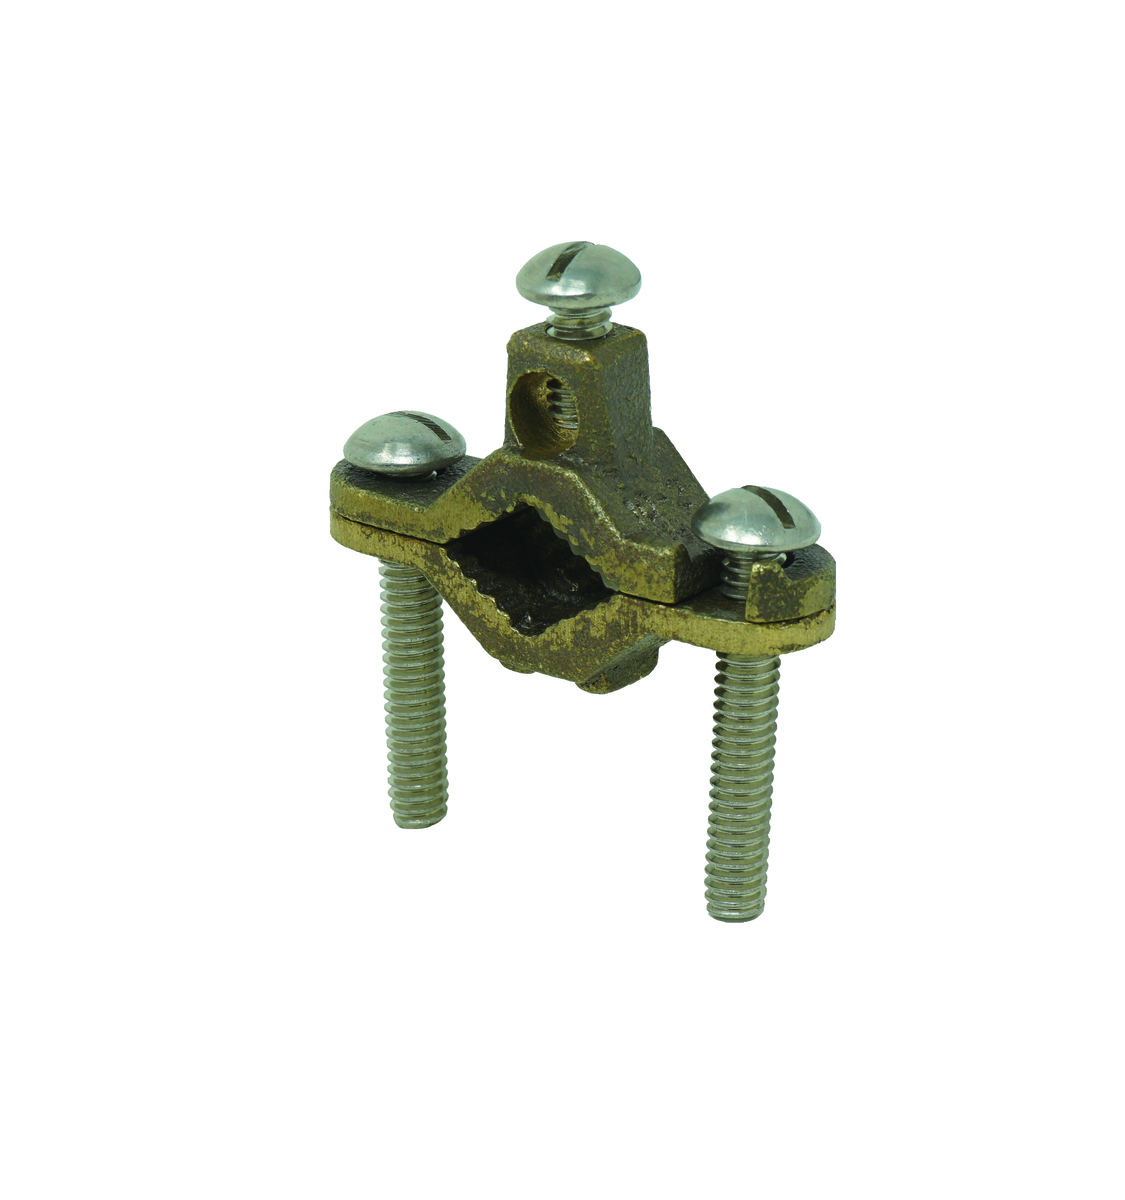 2-10 Awg 1/2"-1" Direct Burial Bz Ground Clamp Ea